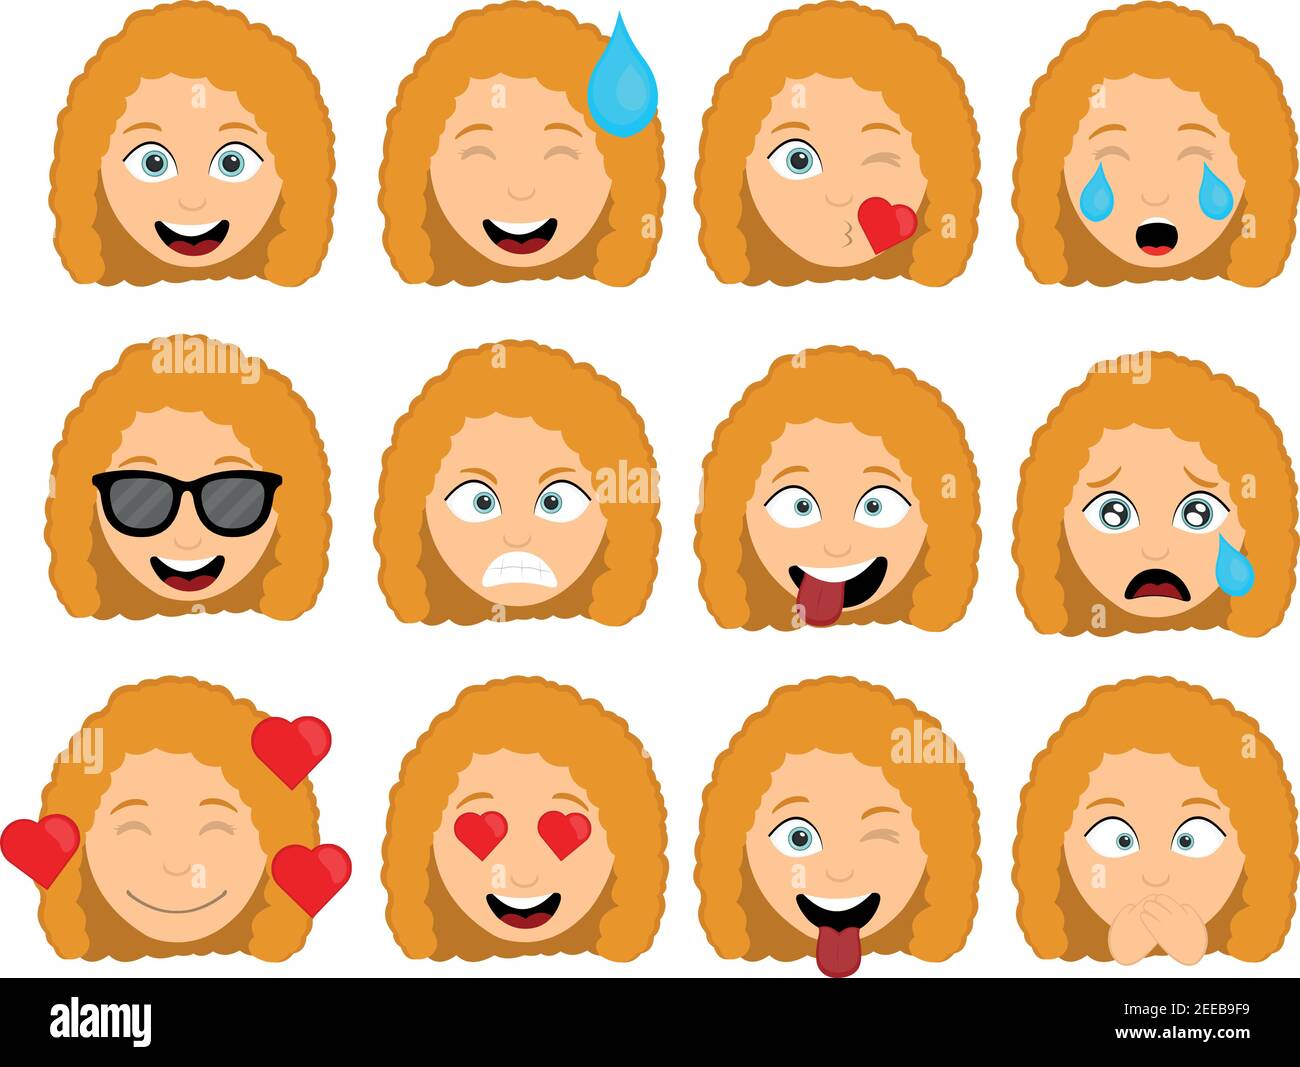 Vector illustration of emoticons of the head of a cartoon woman with various expressions and emotions, of joy, love and angry Stock Vector